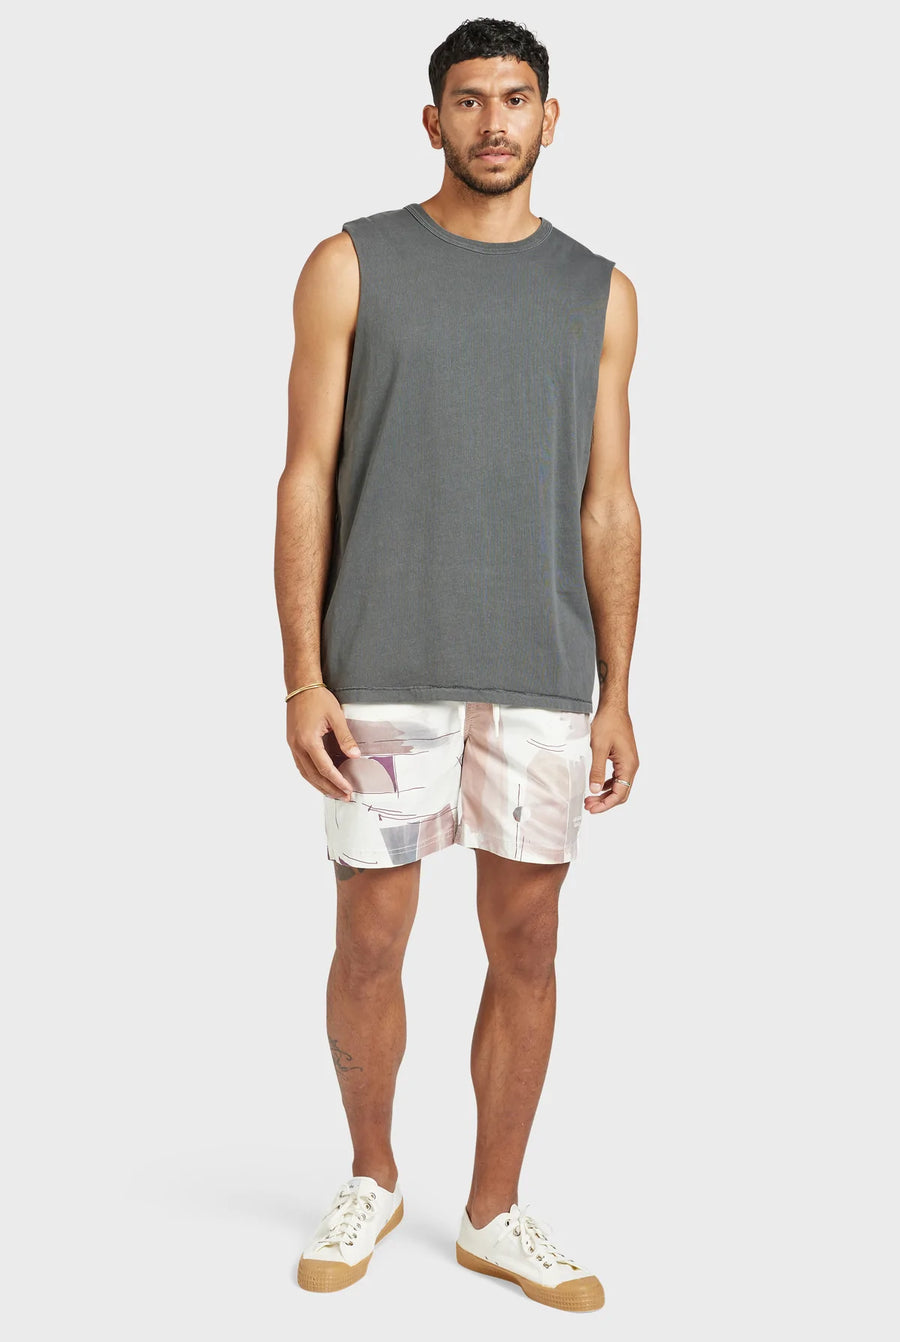 The Academy Brand Jimmy Muscle Tee - Magnet Grey